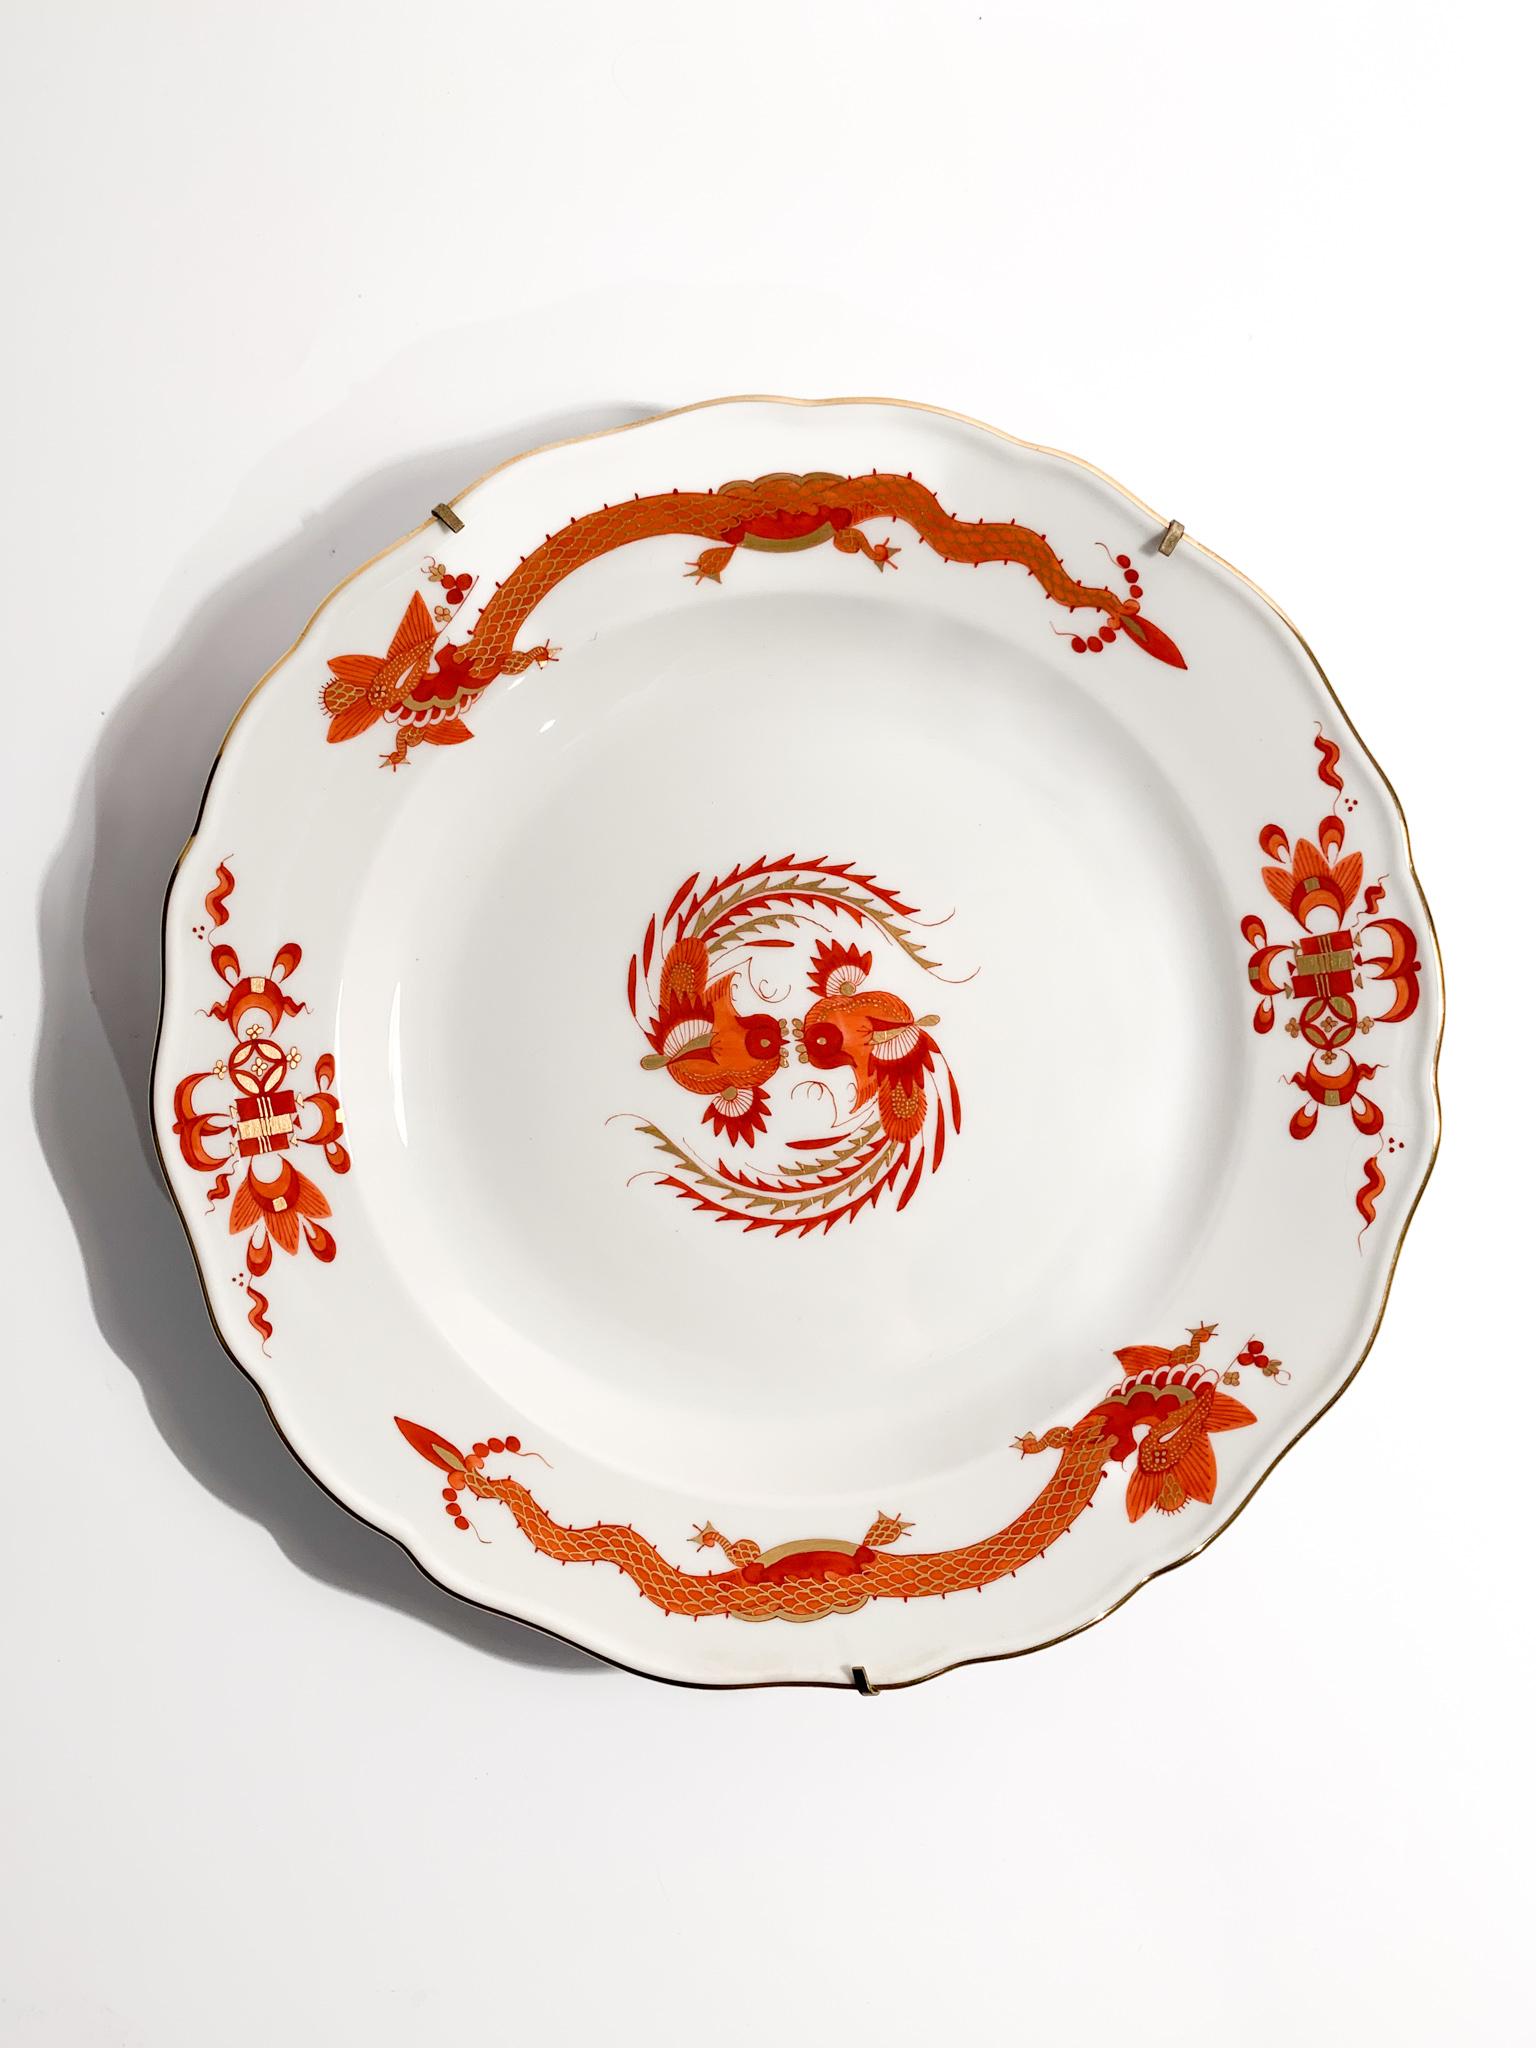 Meissen porcelain plate, Neuer Ausschnitt shape, with red Court Dragon decoration, mark 1850 - 1925. Wall hanging structure available. 

Ø cm 25

Meissen Porcelain was one of the first European examples of porcelain production, due to its